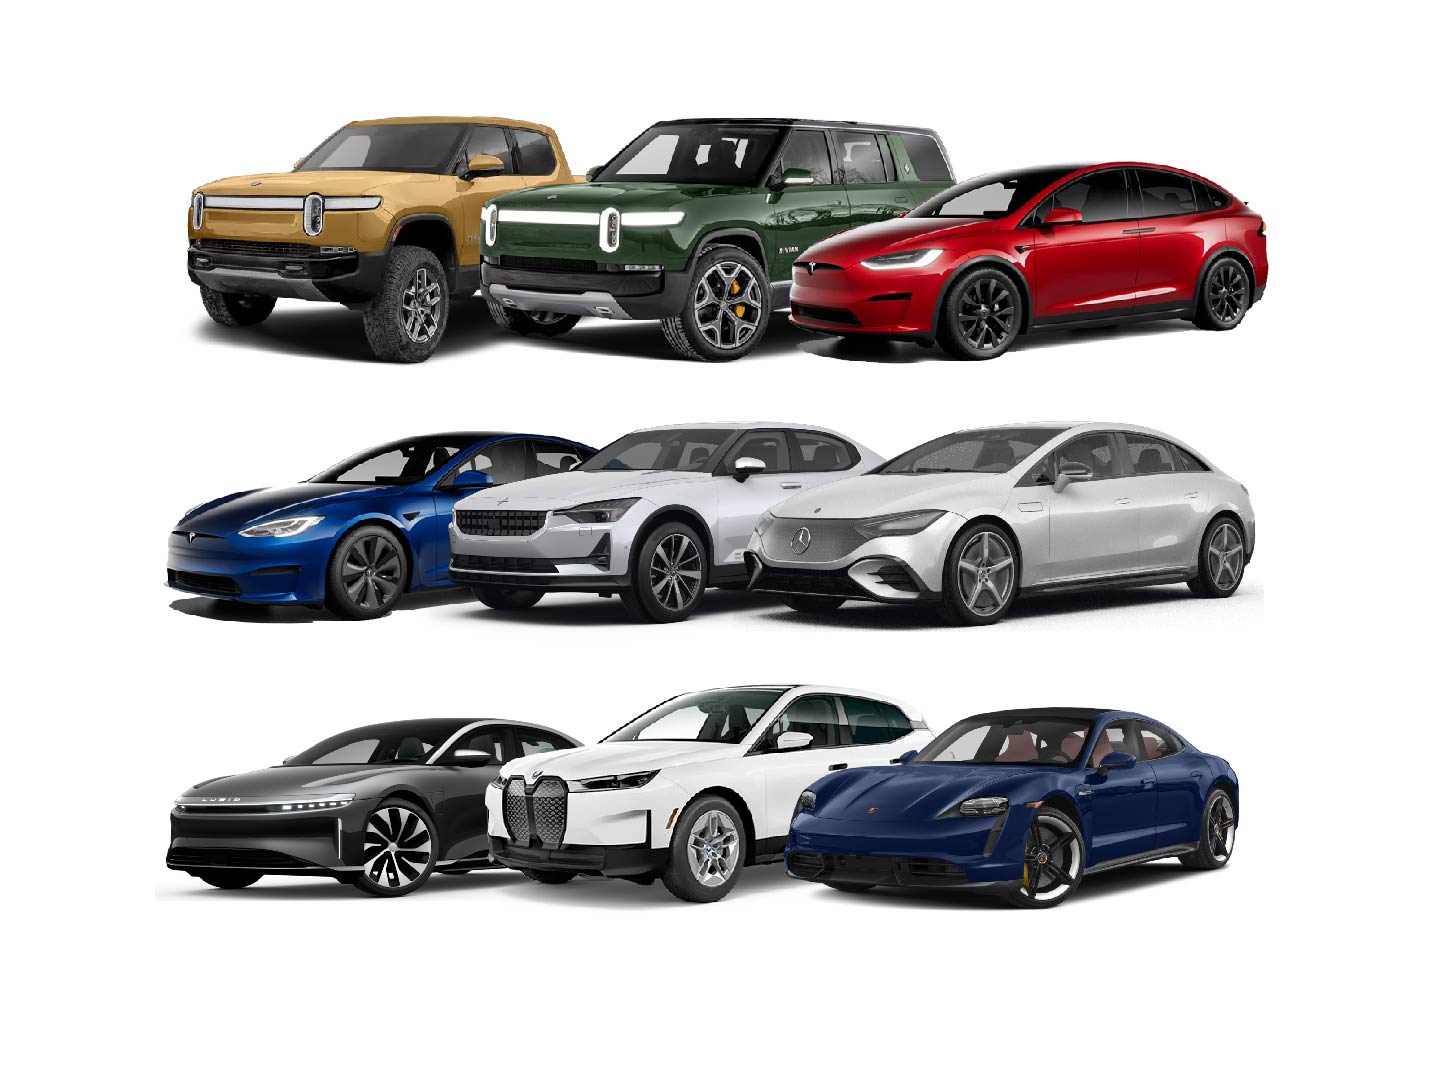 A selection of vehicles offered for the 8th Annual Raffle Grand Prize.